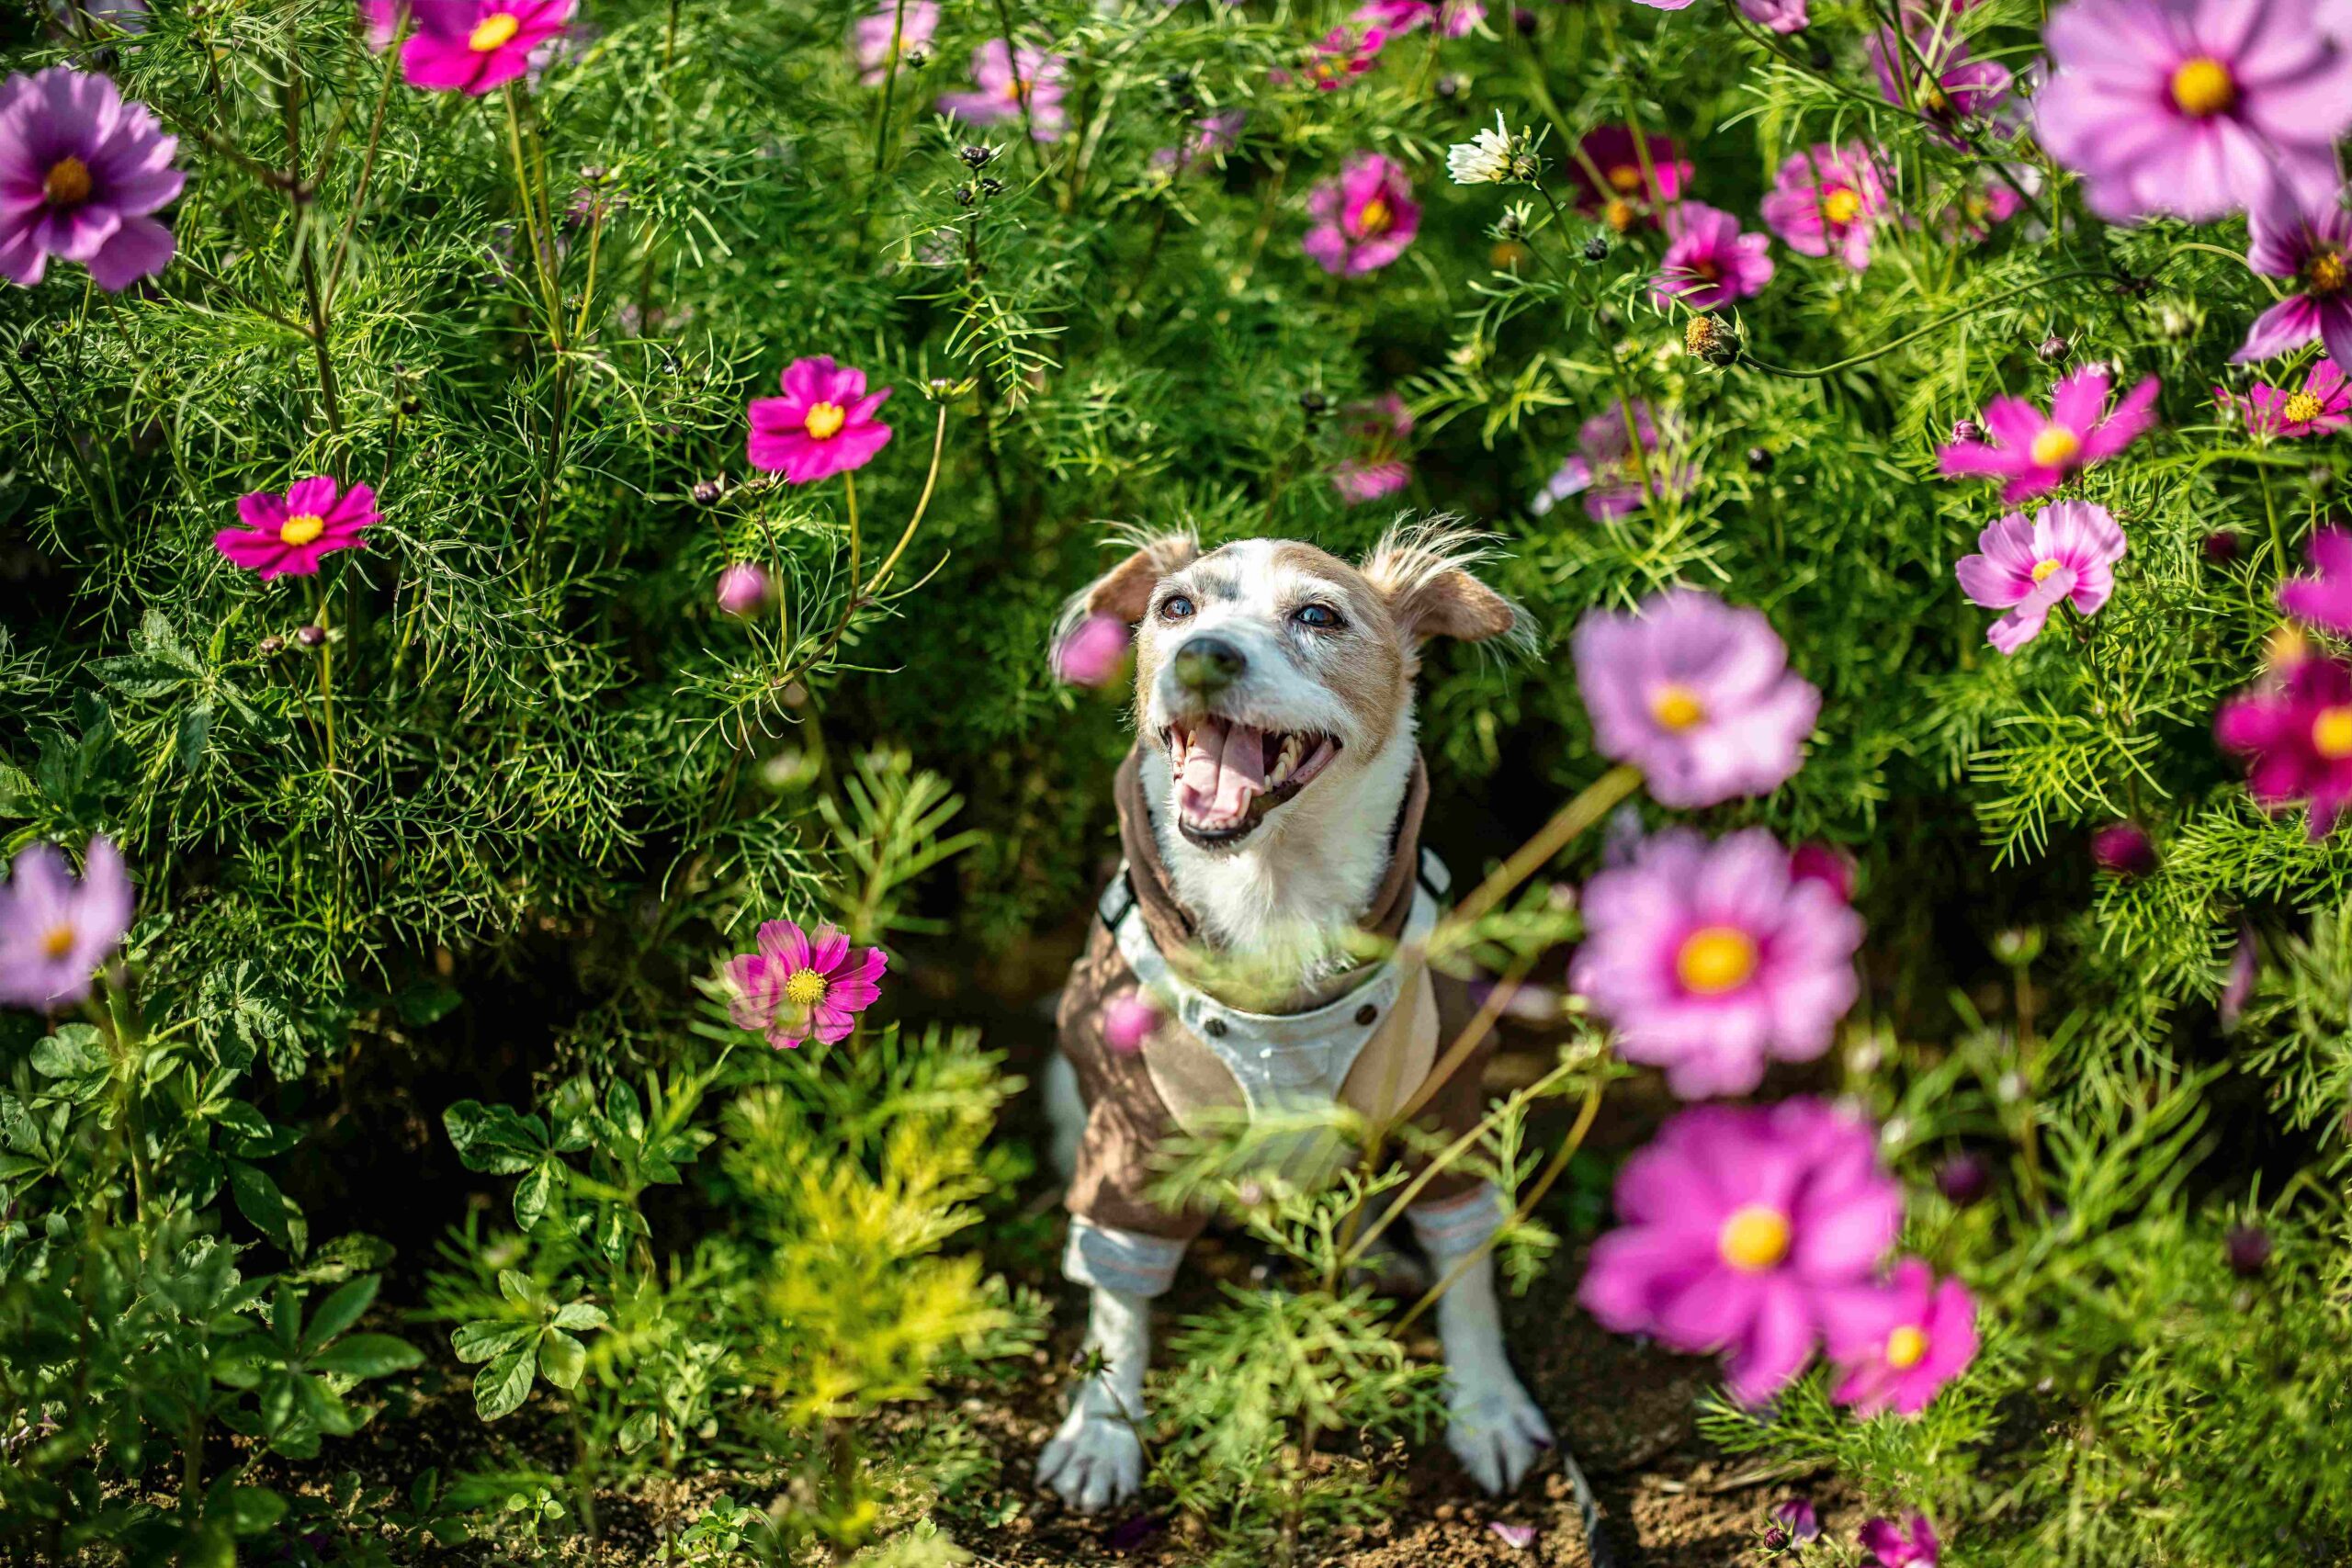 Dog outside, surrounded by pink flowers